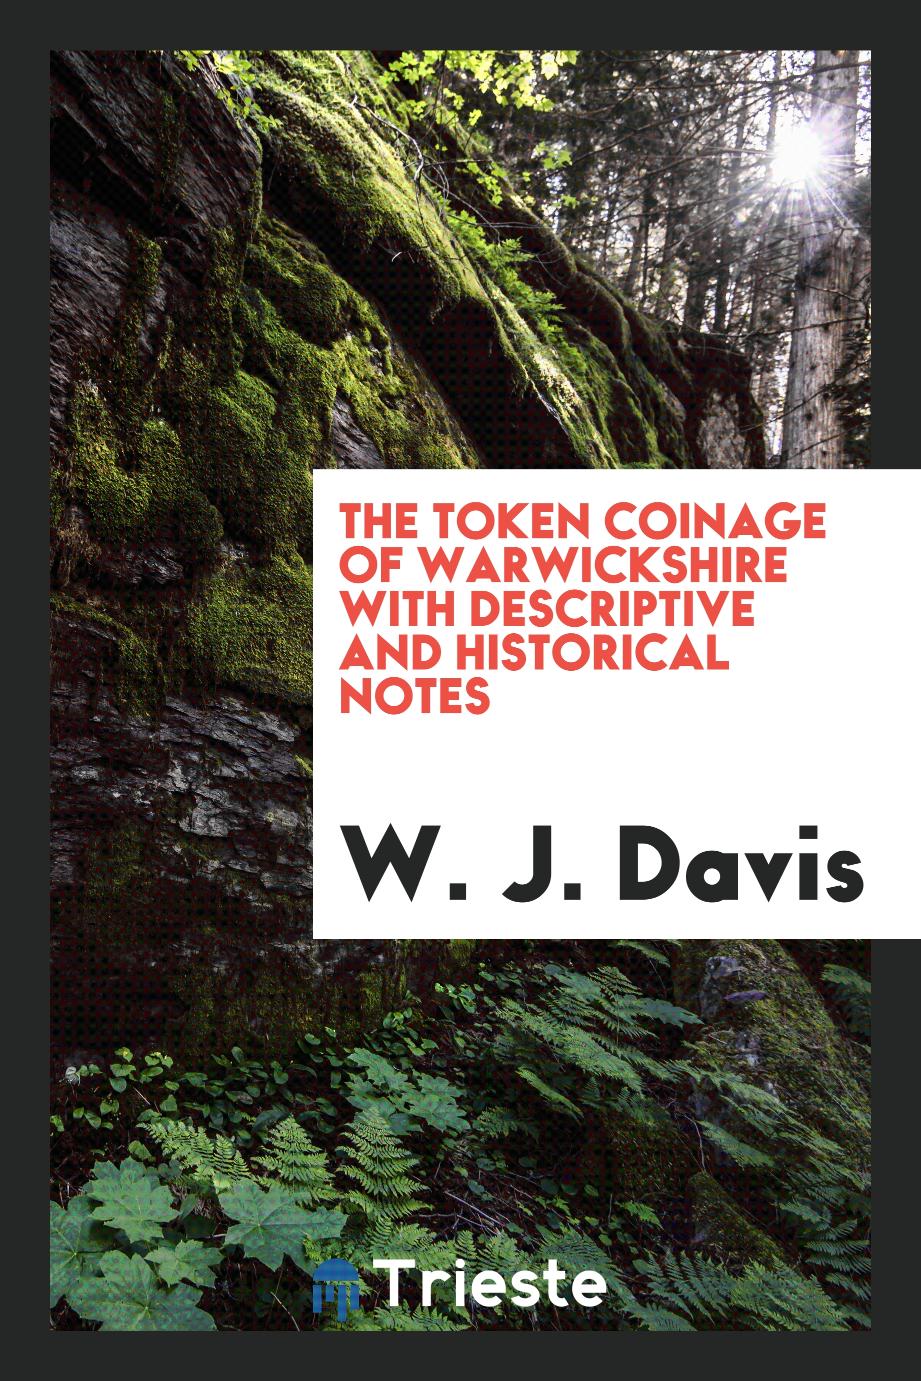 The token coinage of Warwickshire with descriptive and historical notes